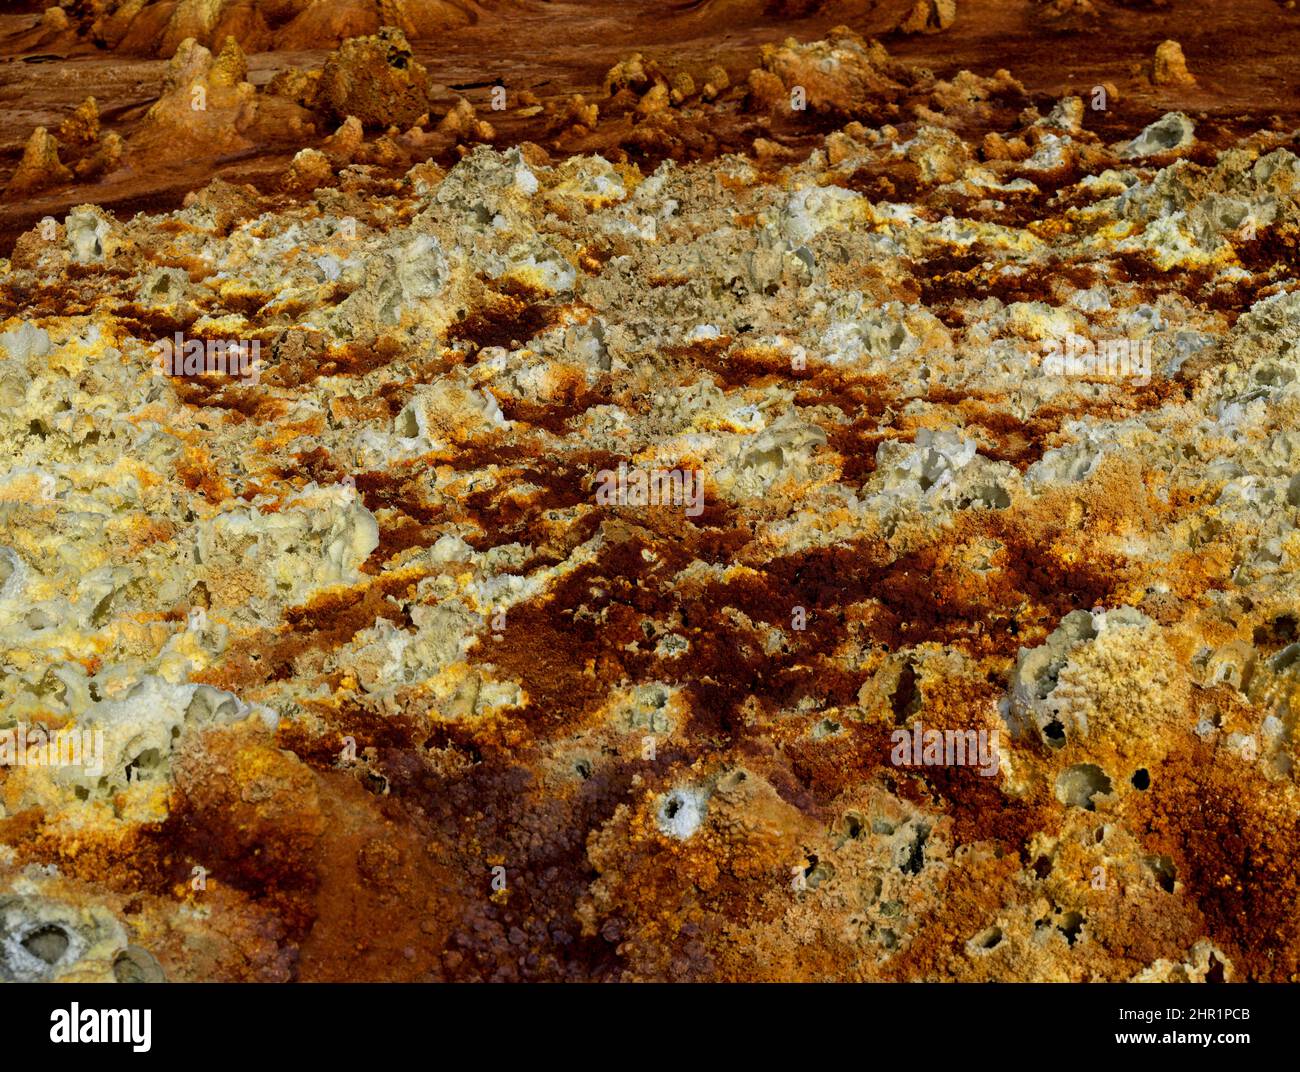 Panorama of surreal colors and Mars like landscape created by Sulphur springs in the hottest place on earth, the Danakil Depression in the Afar Region Stock Photo